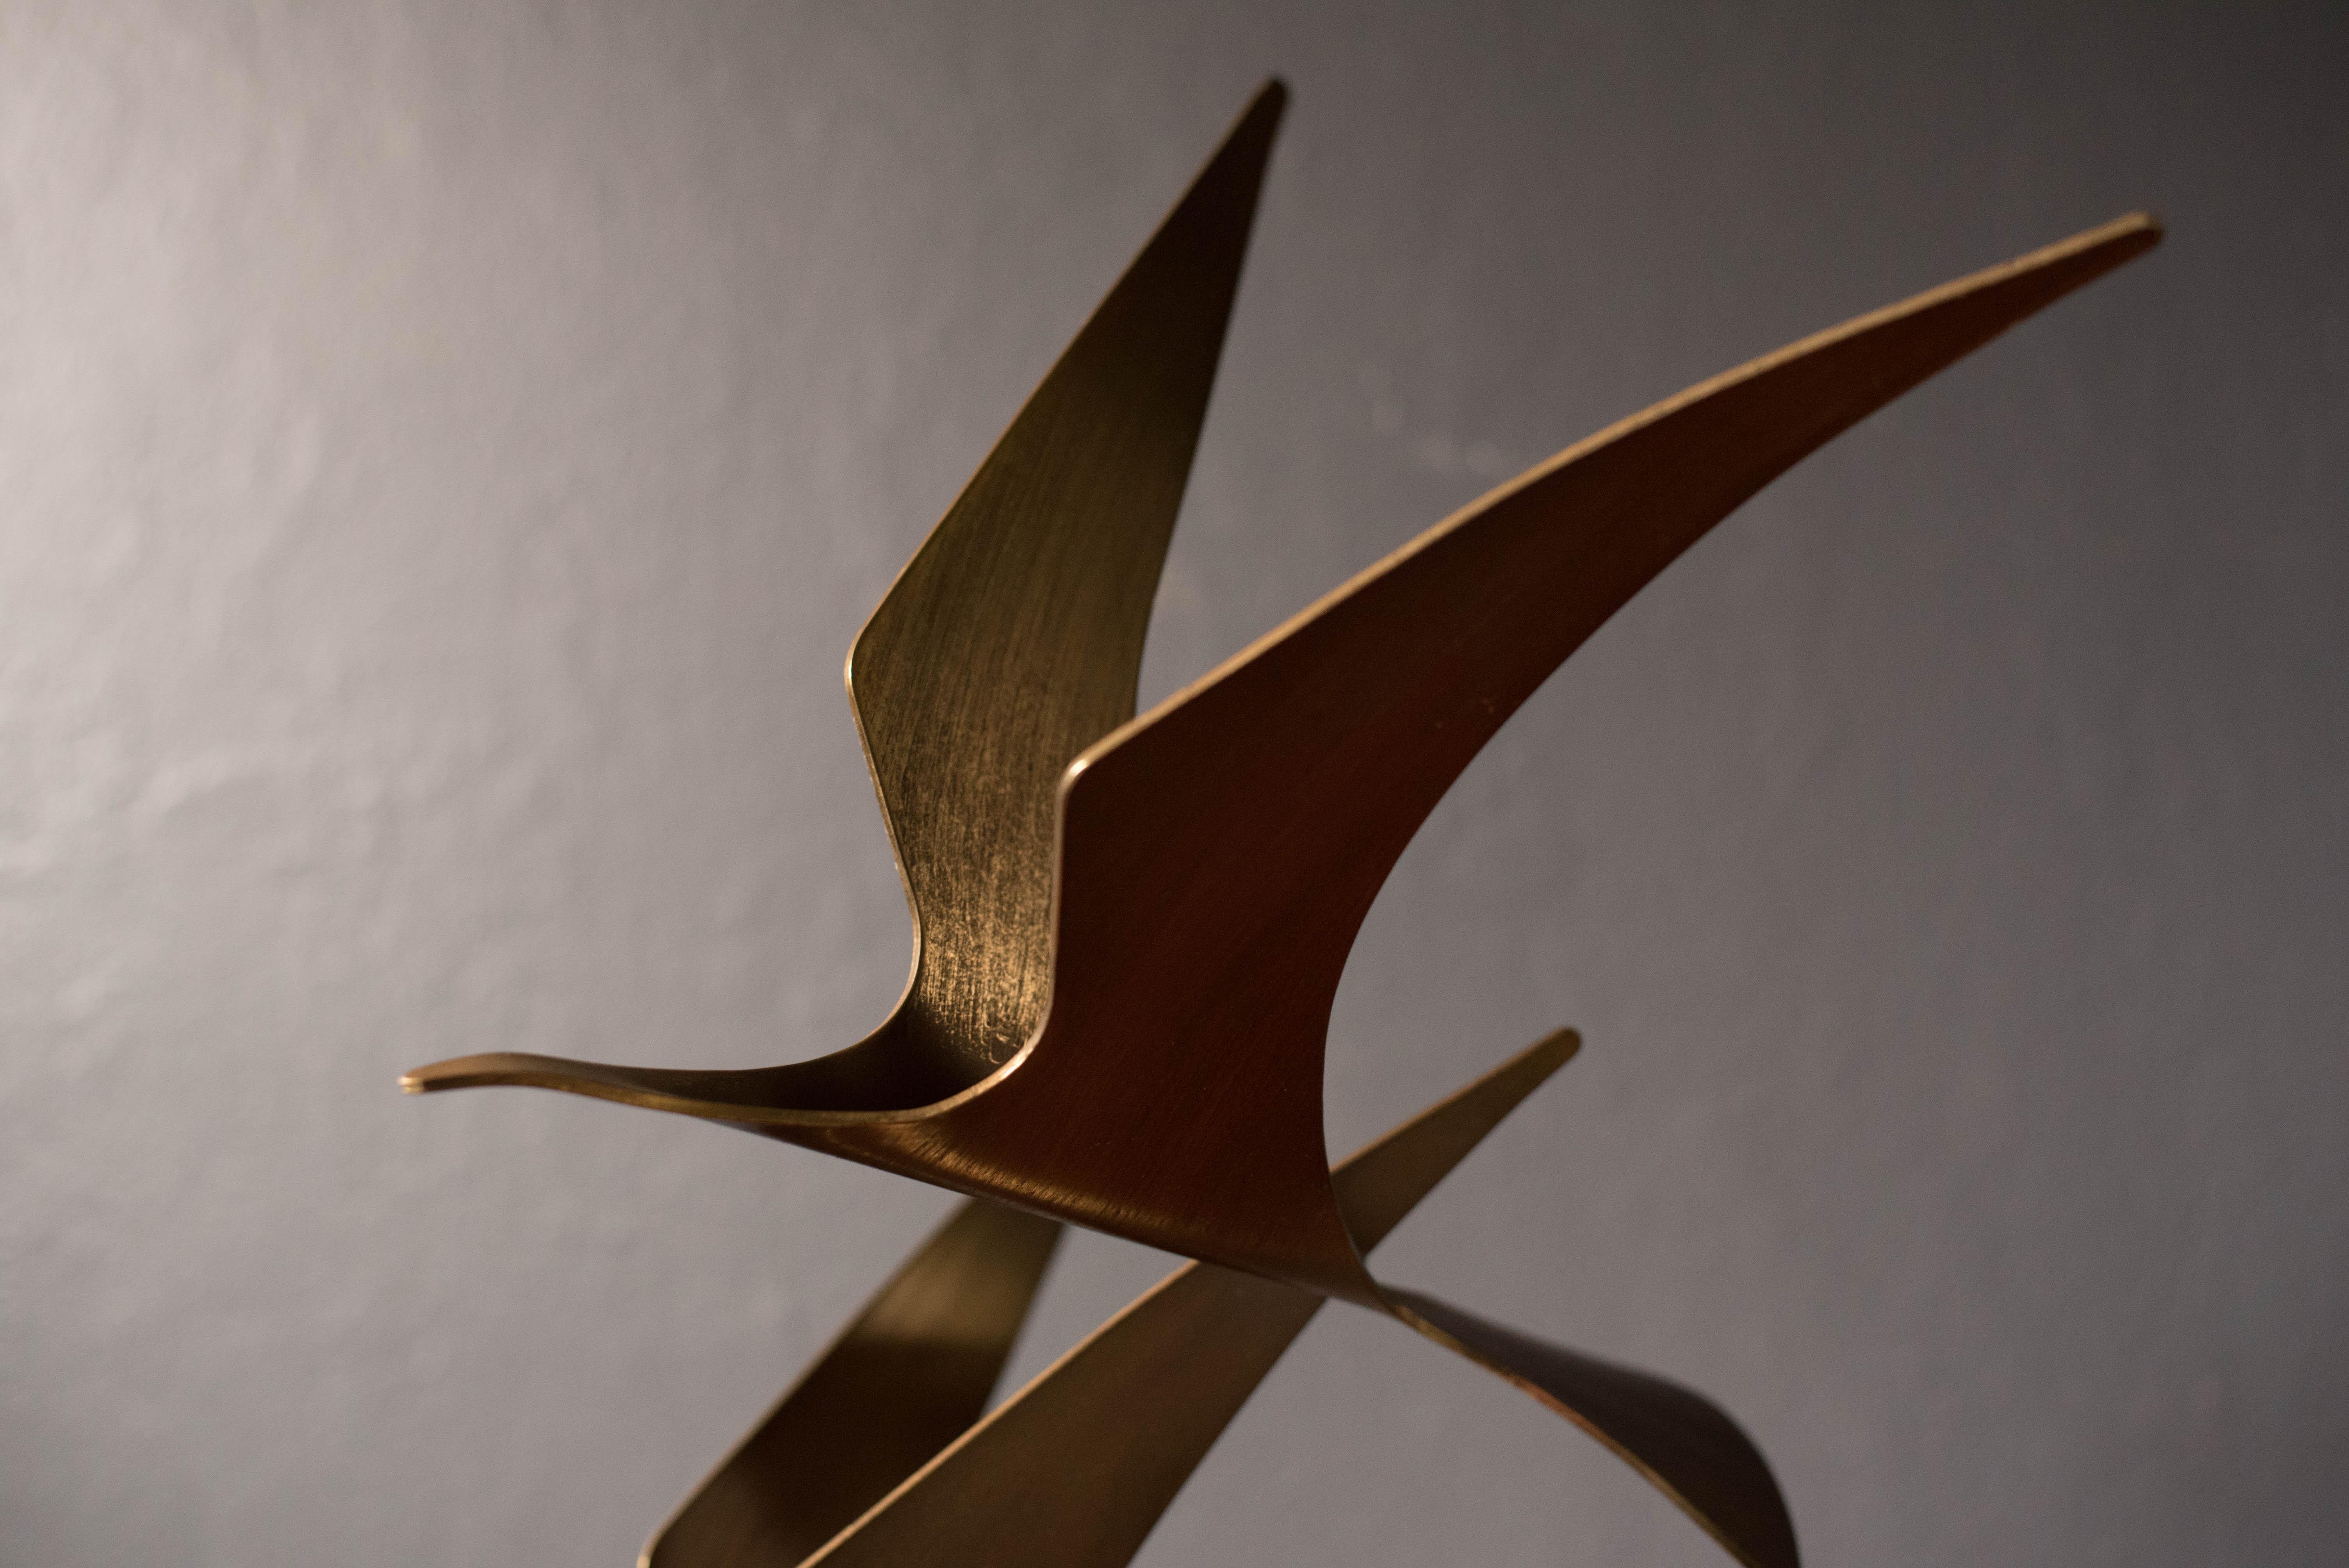 Abstract birds in flight sculpture by Curtis Jere, circa 1981. The bird sculptures are made of brass and sits on a heavy stone base.